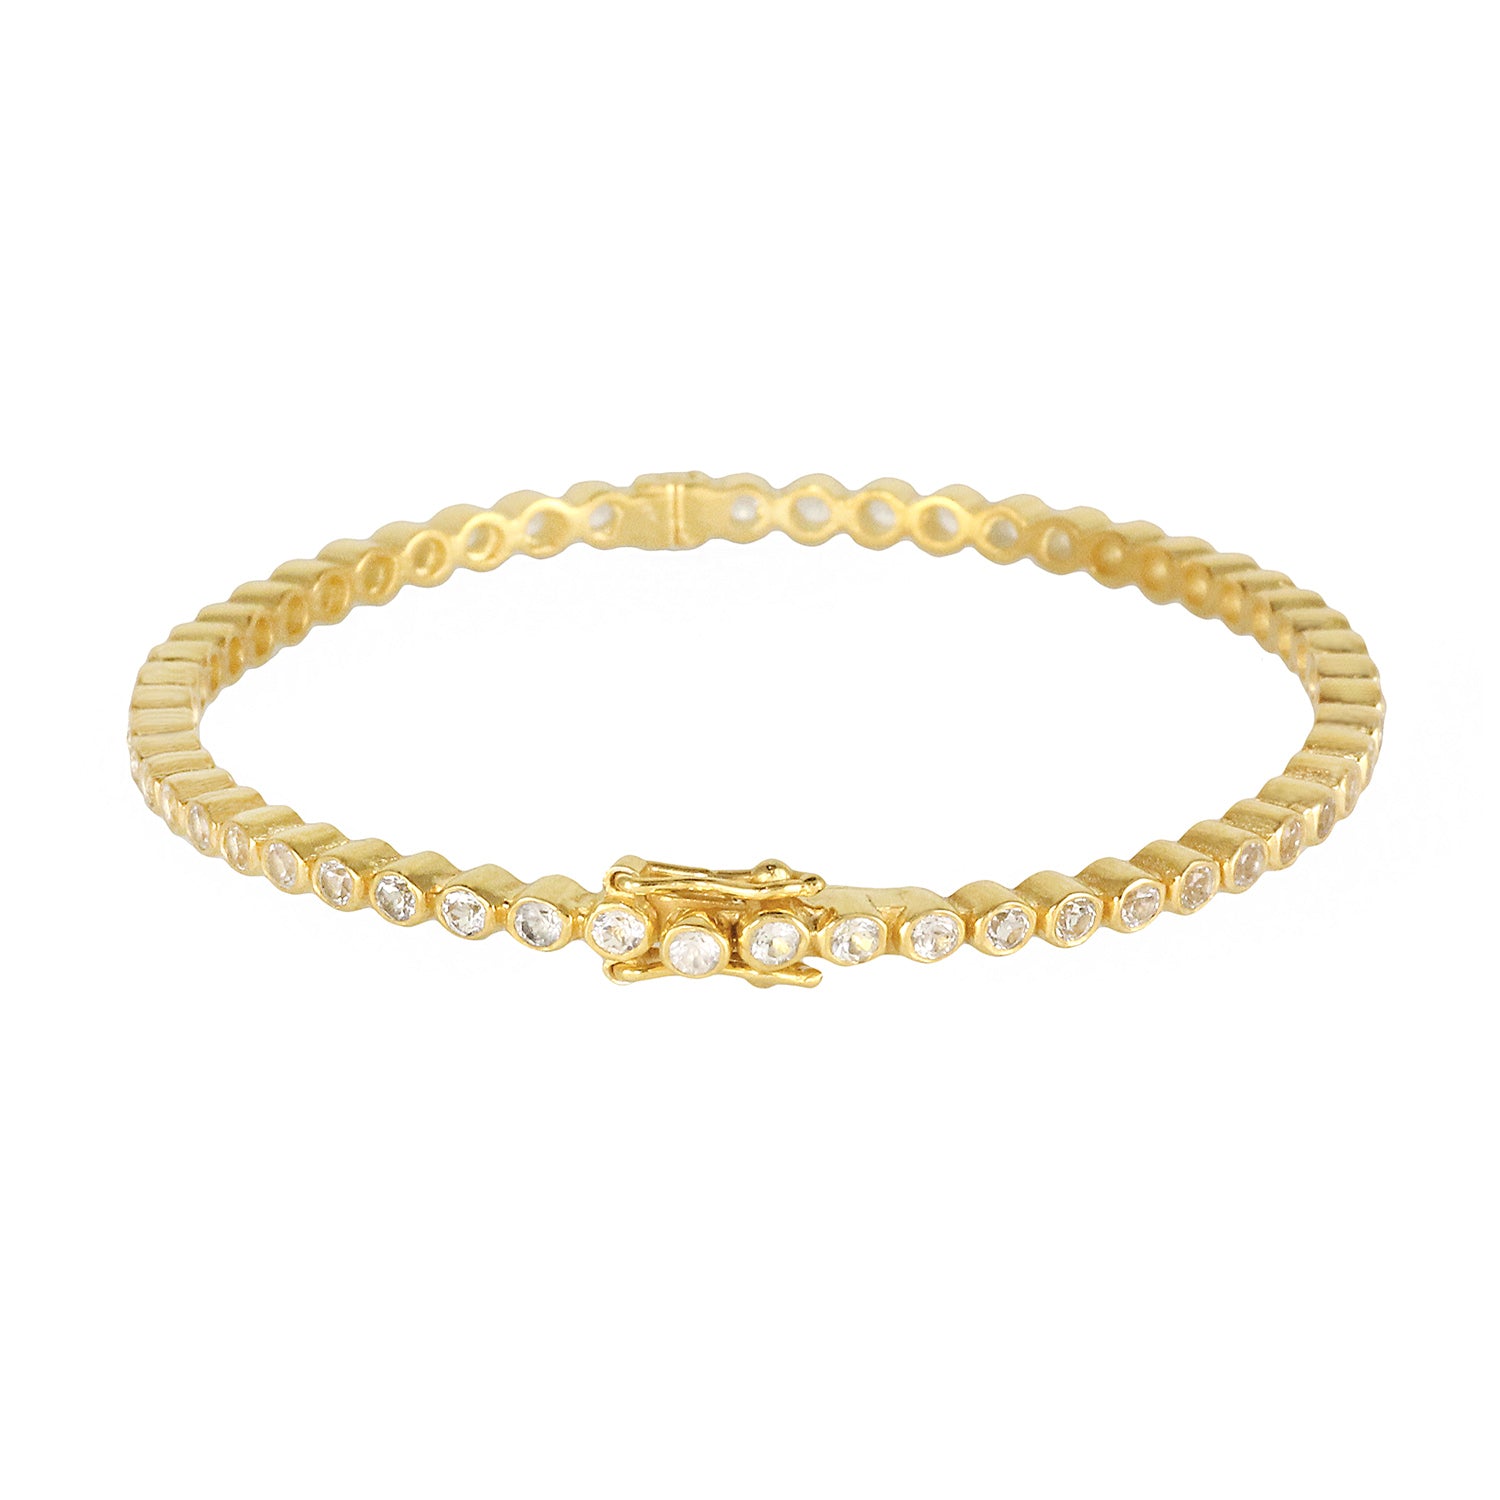 Silver gold plated thin bracelet bangle with white topaz stone, made in India